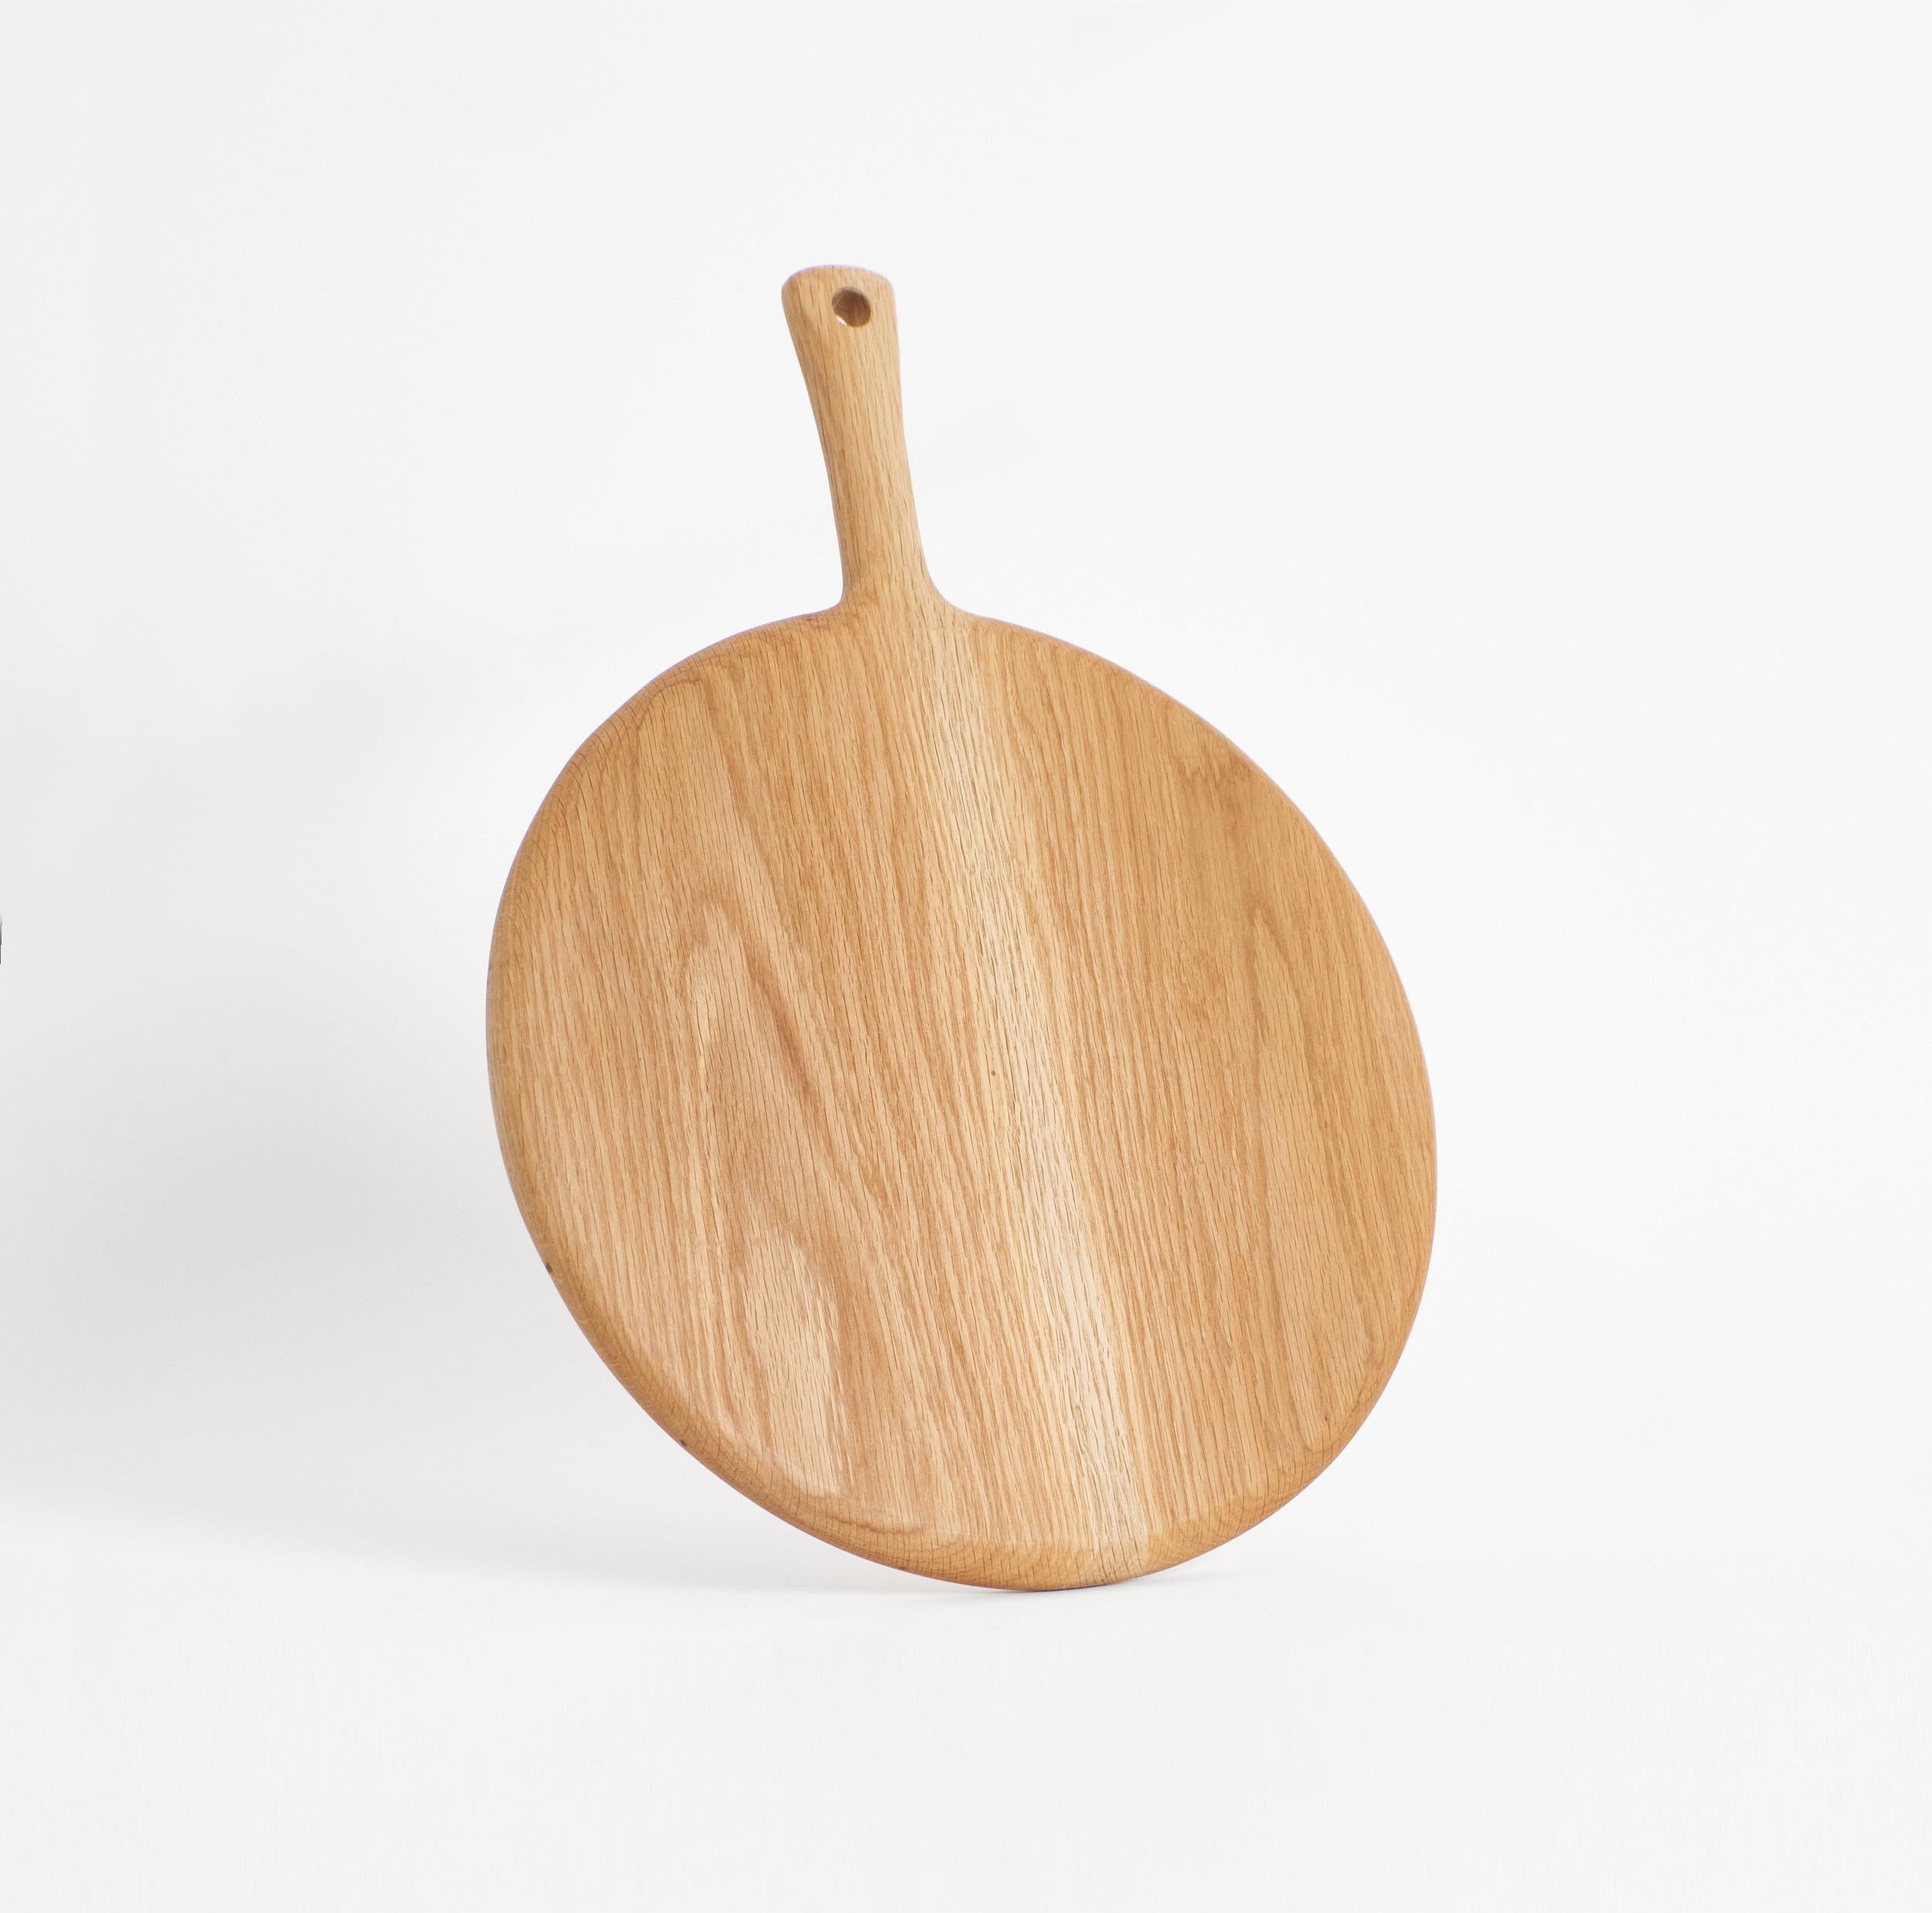 Hand-made wooden board

This large round board is hand-carved from oak. The boards as an individual or as part of the family will become a key item in every kitchen being decorative as well as functional. 
Available in three other sizes and wood